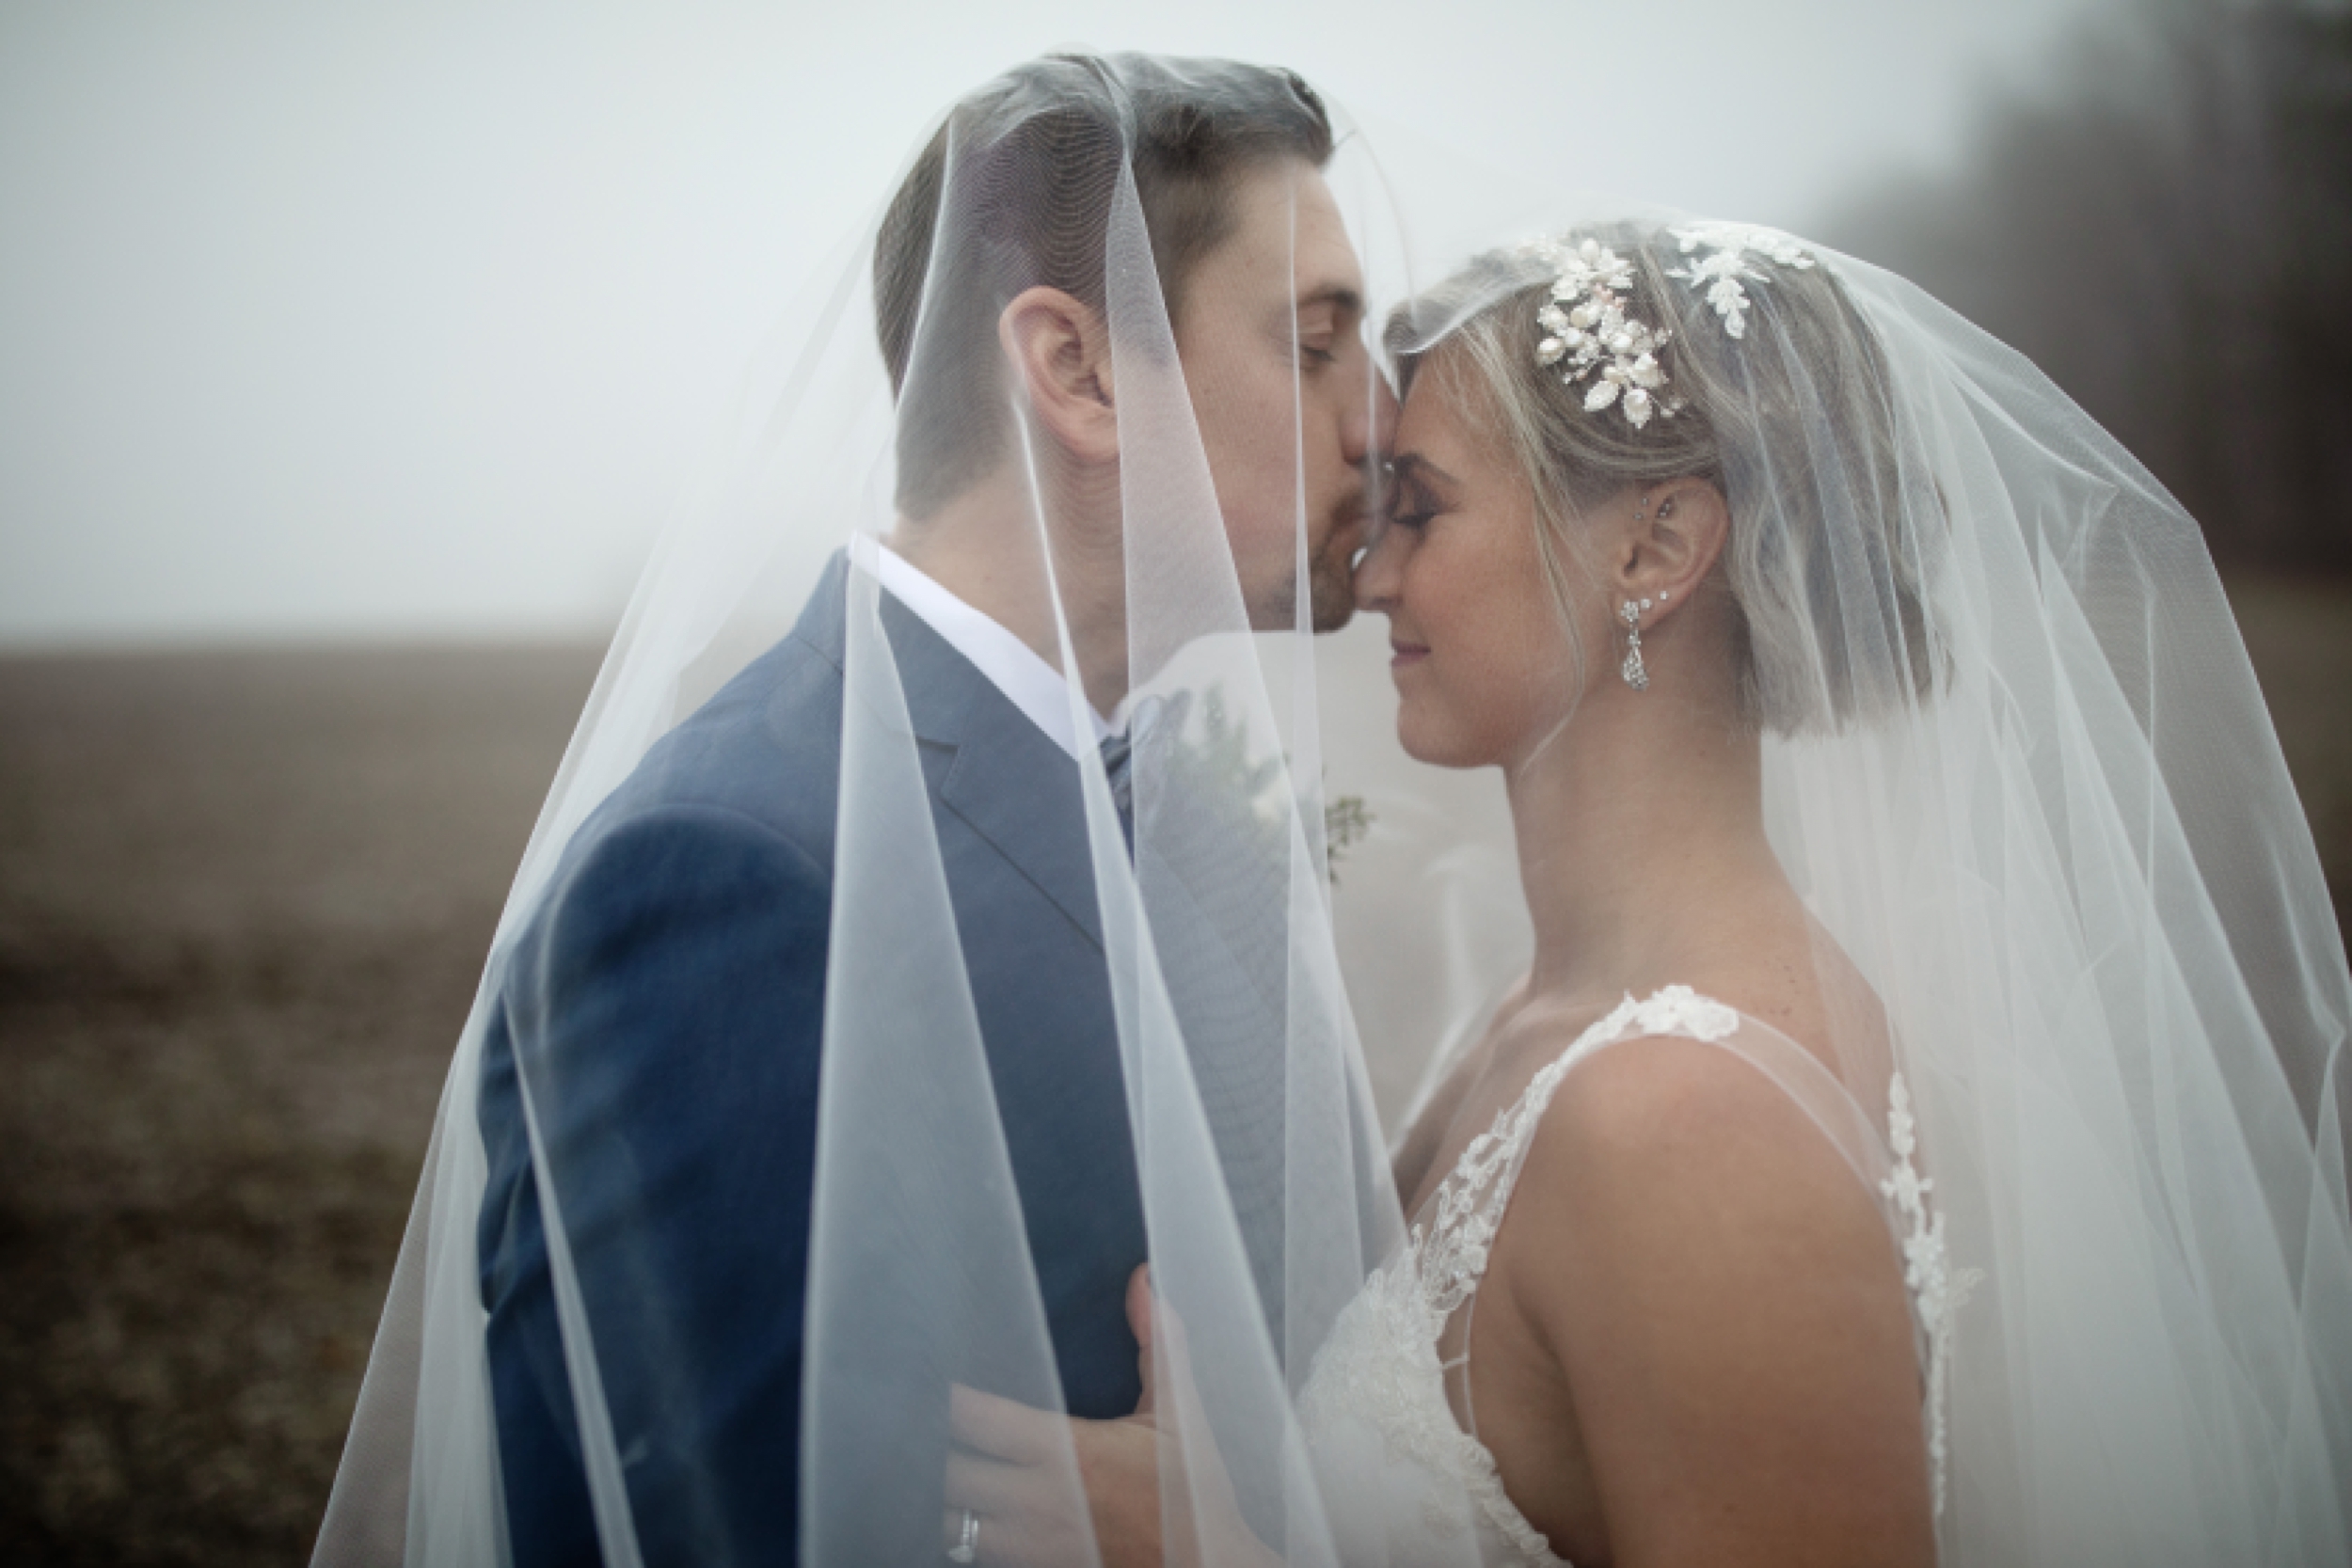 Woodstone Lodge and Country Club, Allentown, PA foggy romantic wedding, captured by East Coast Destination Wedding Photographers Janae Rose Photography